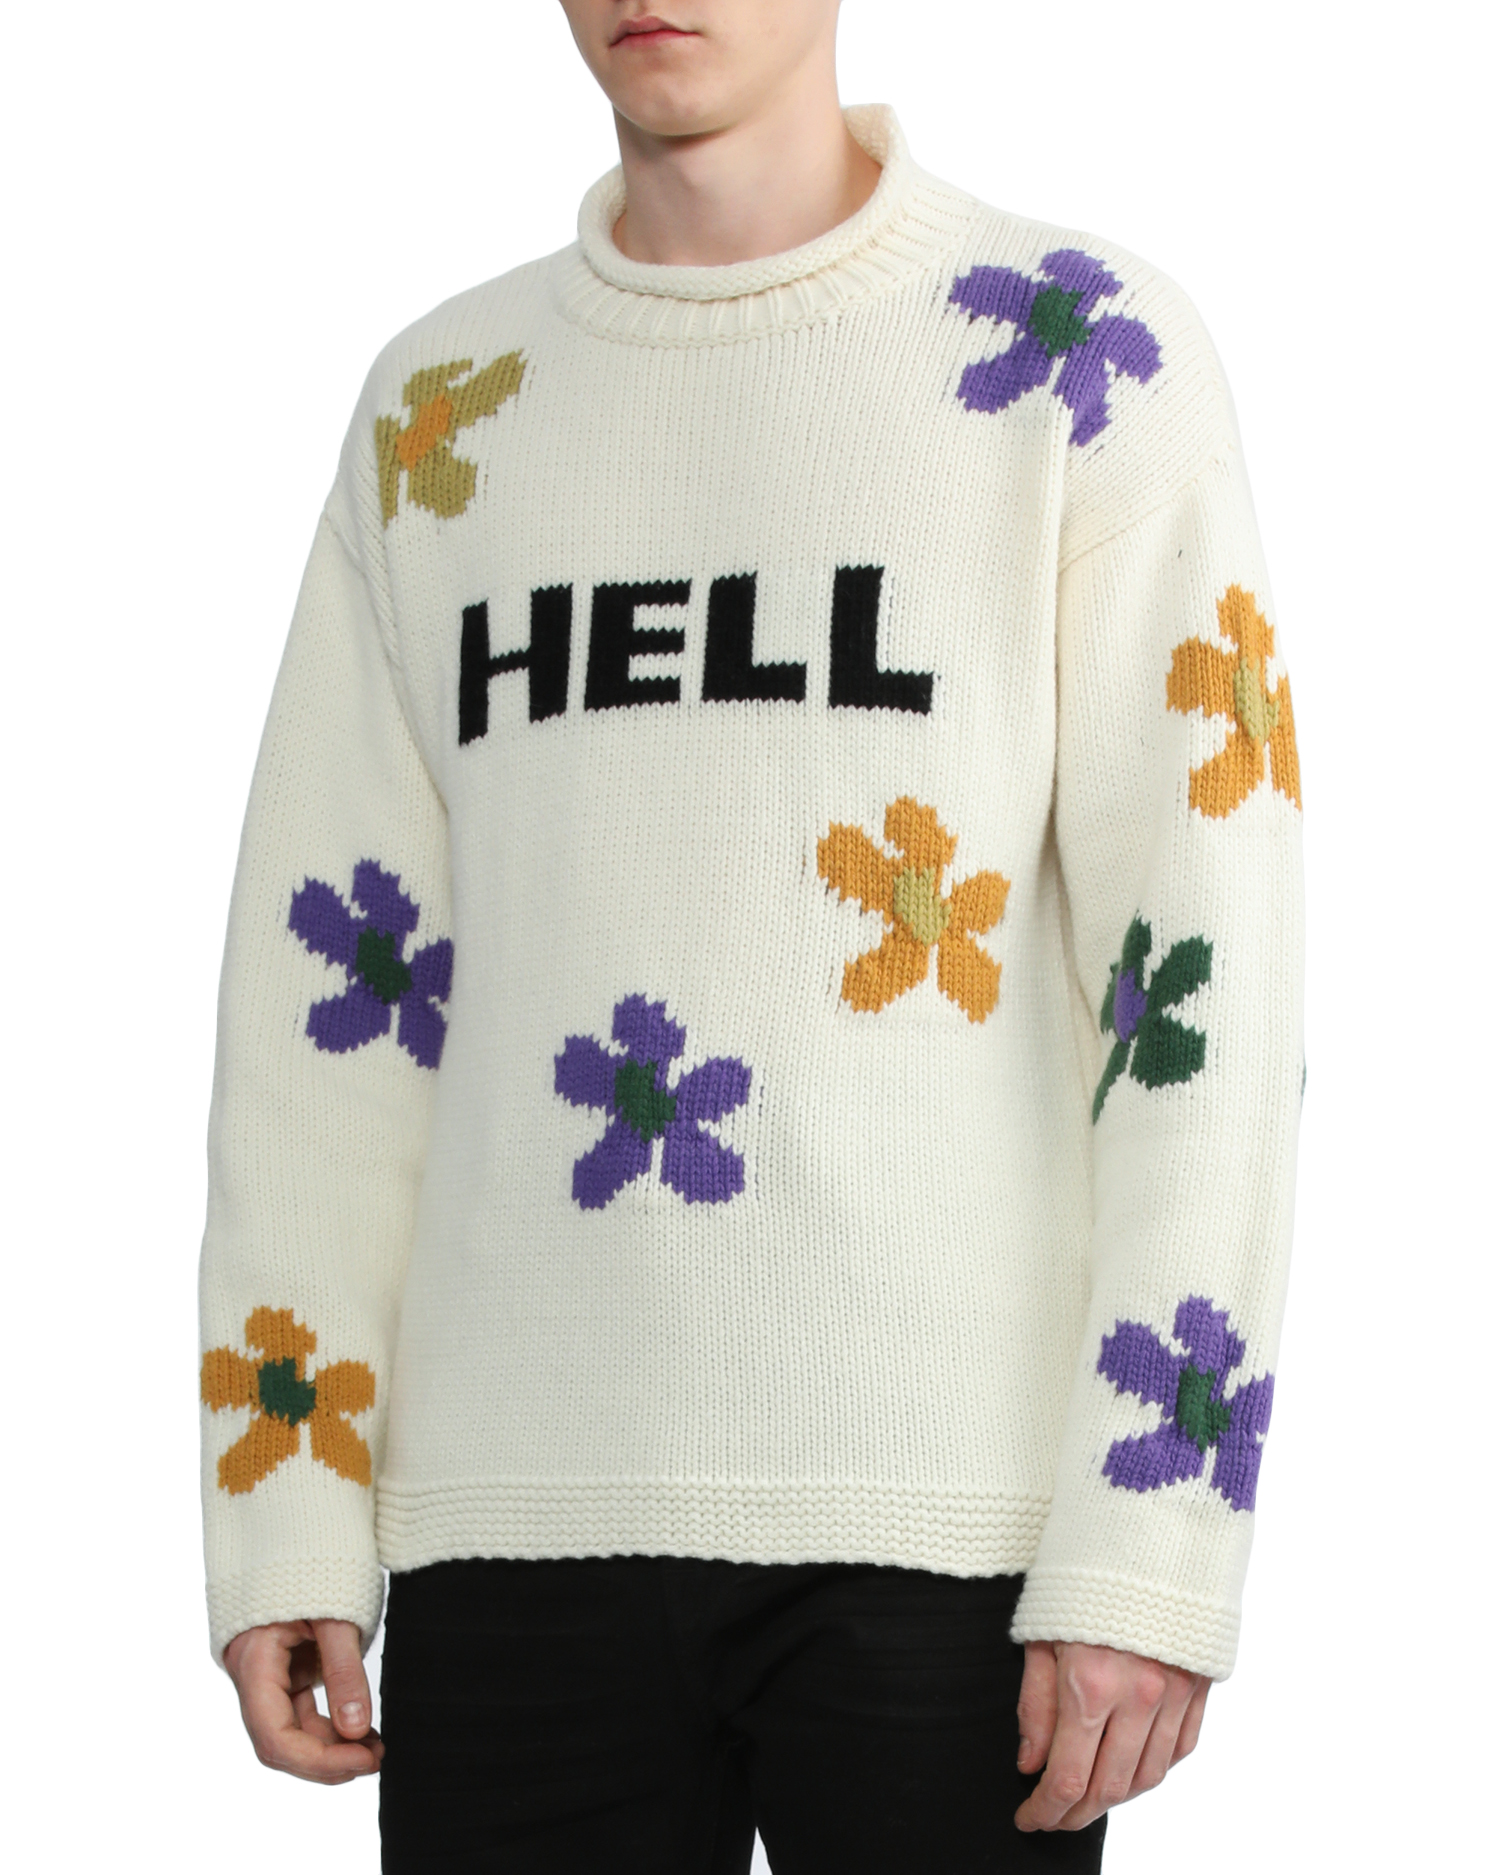 Hell's flowers knit crew neck